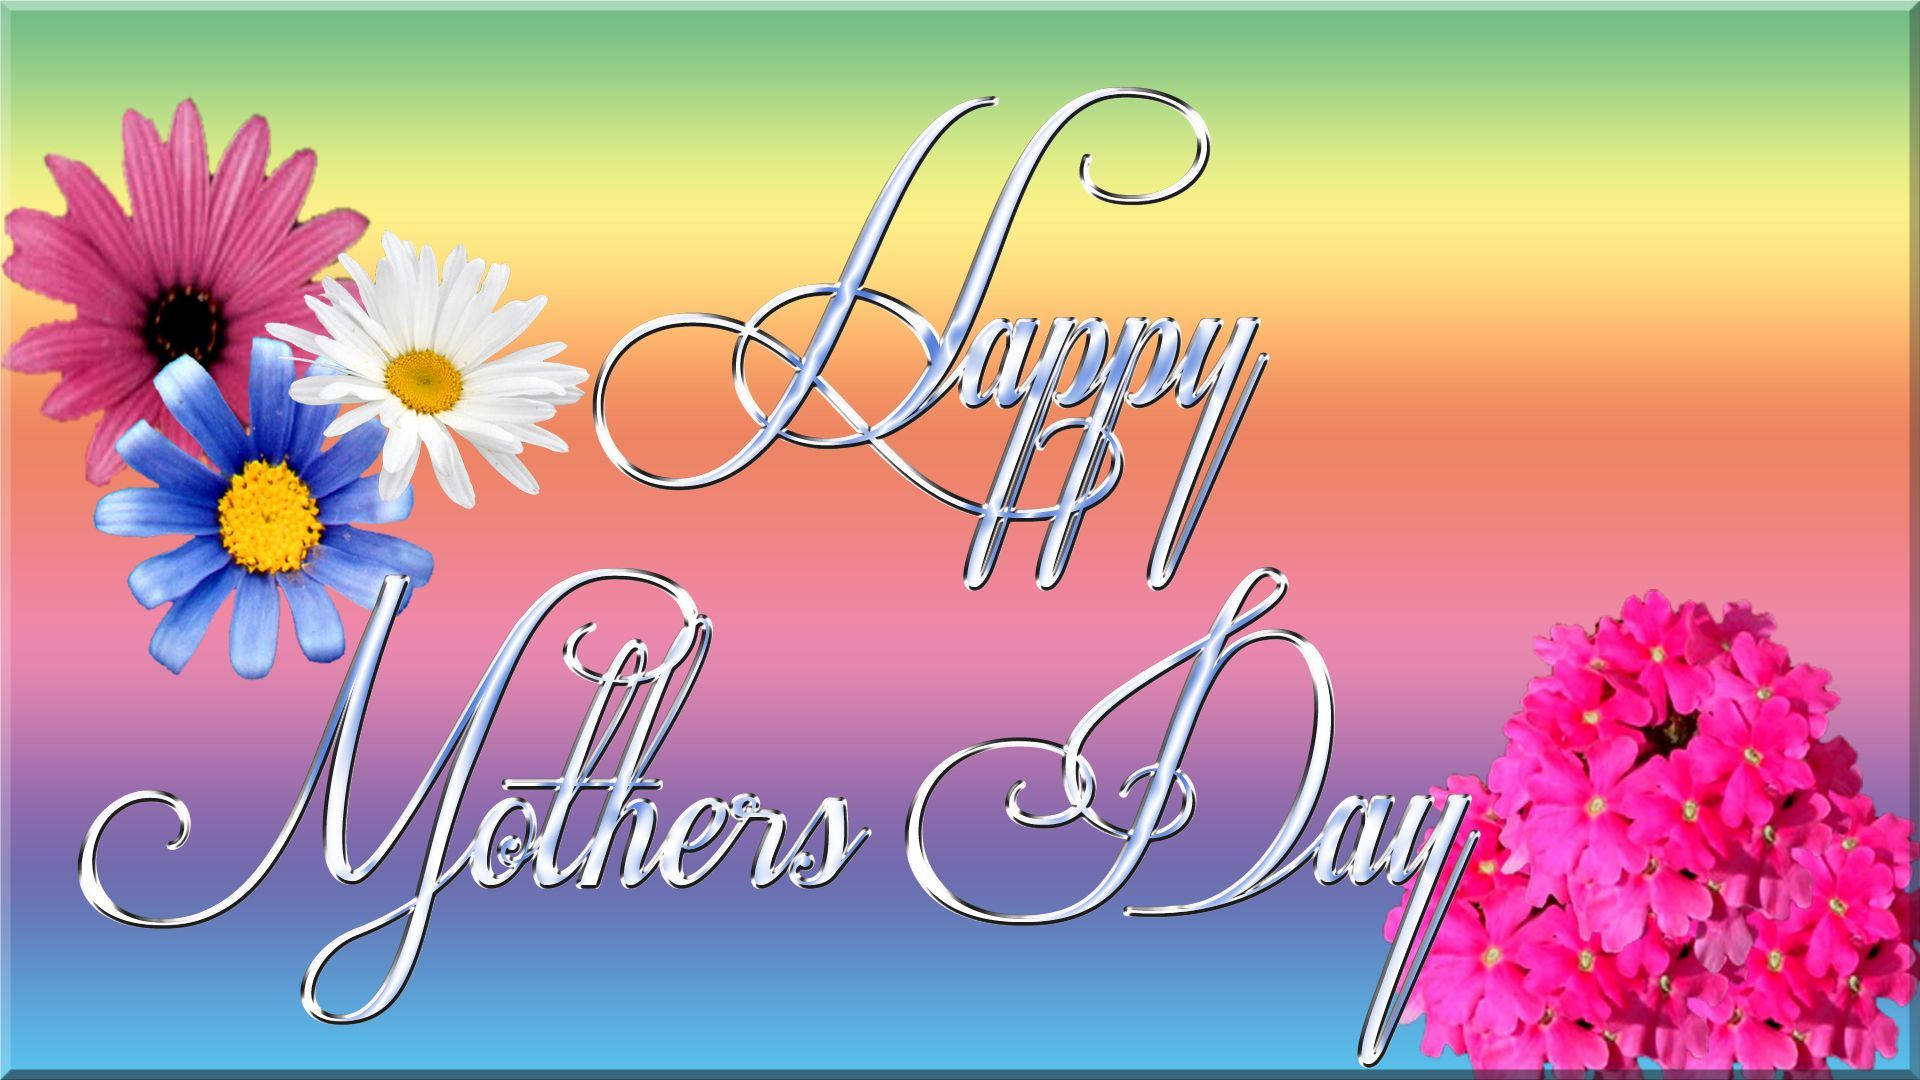 Mother's Day is here and the colorful rainbow is here to spread love and joy. Wallpaper